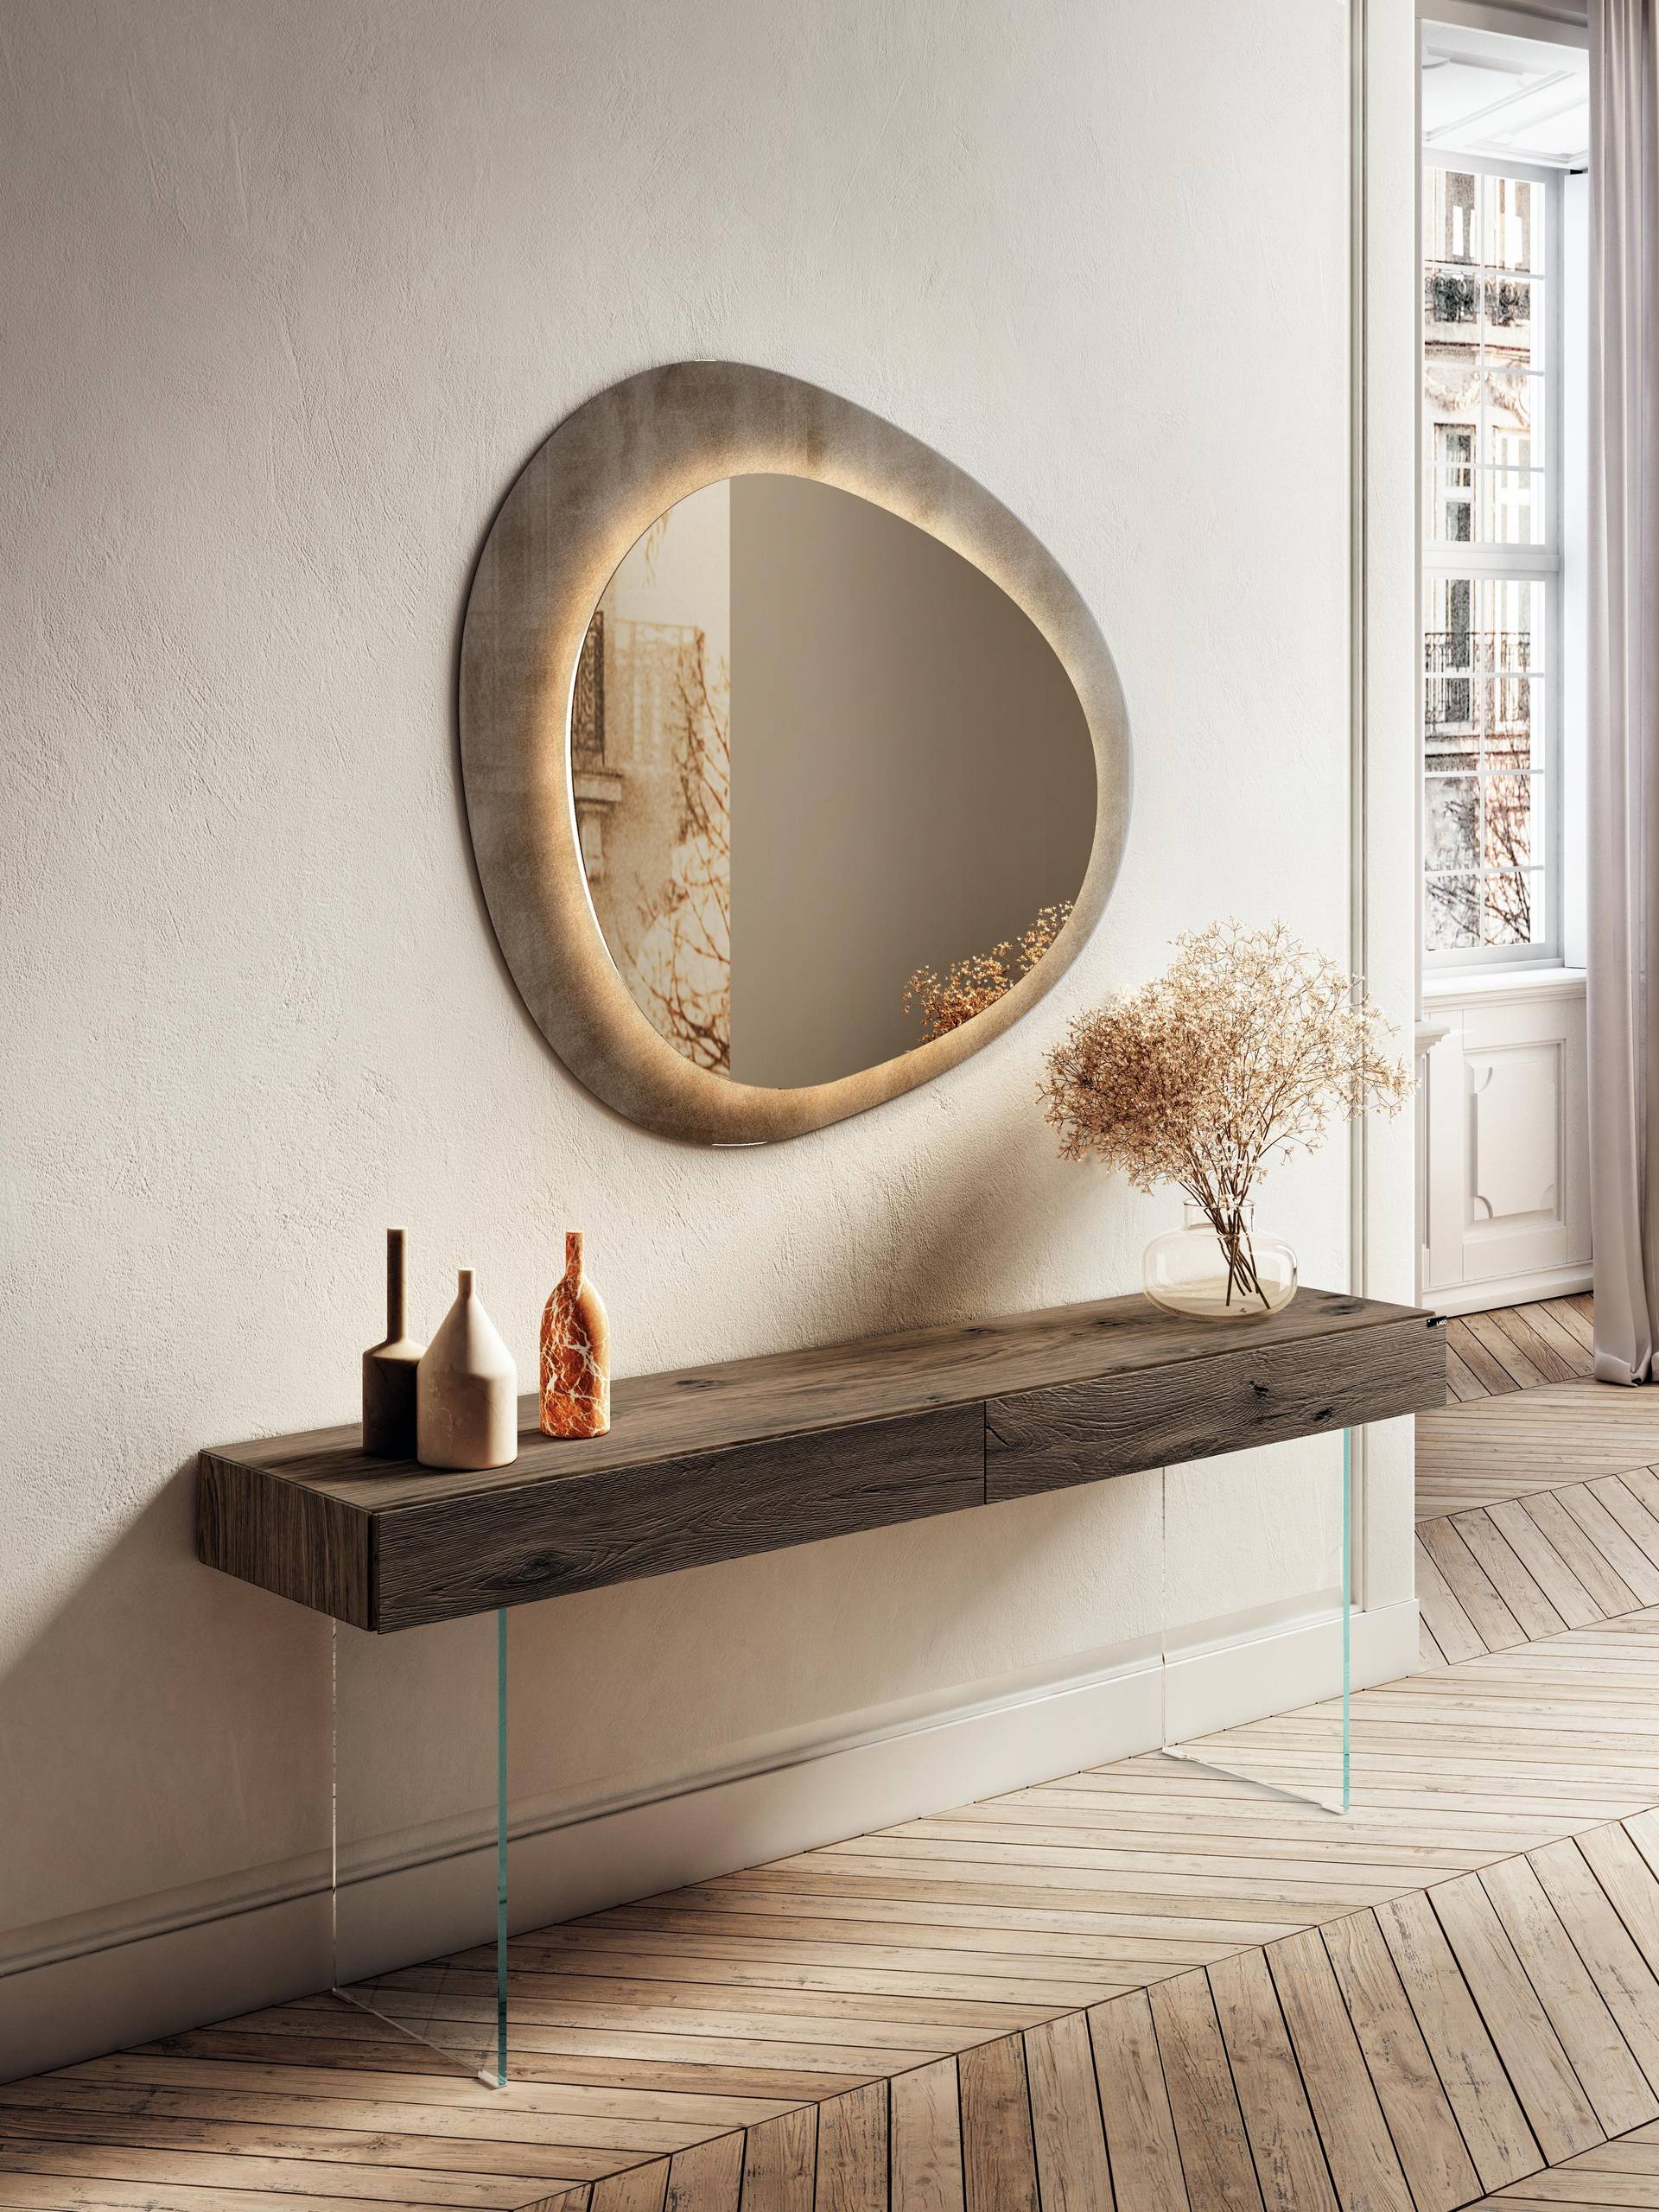 console table with mirror in wood and glass | Console 36e8 | LAGO